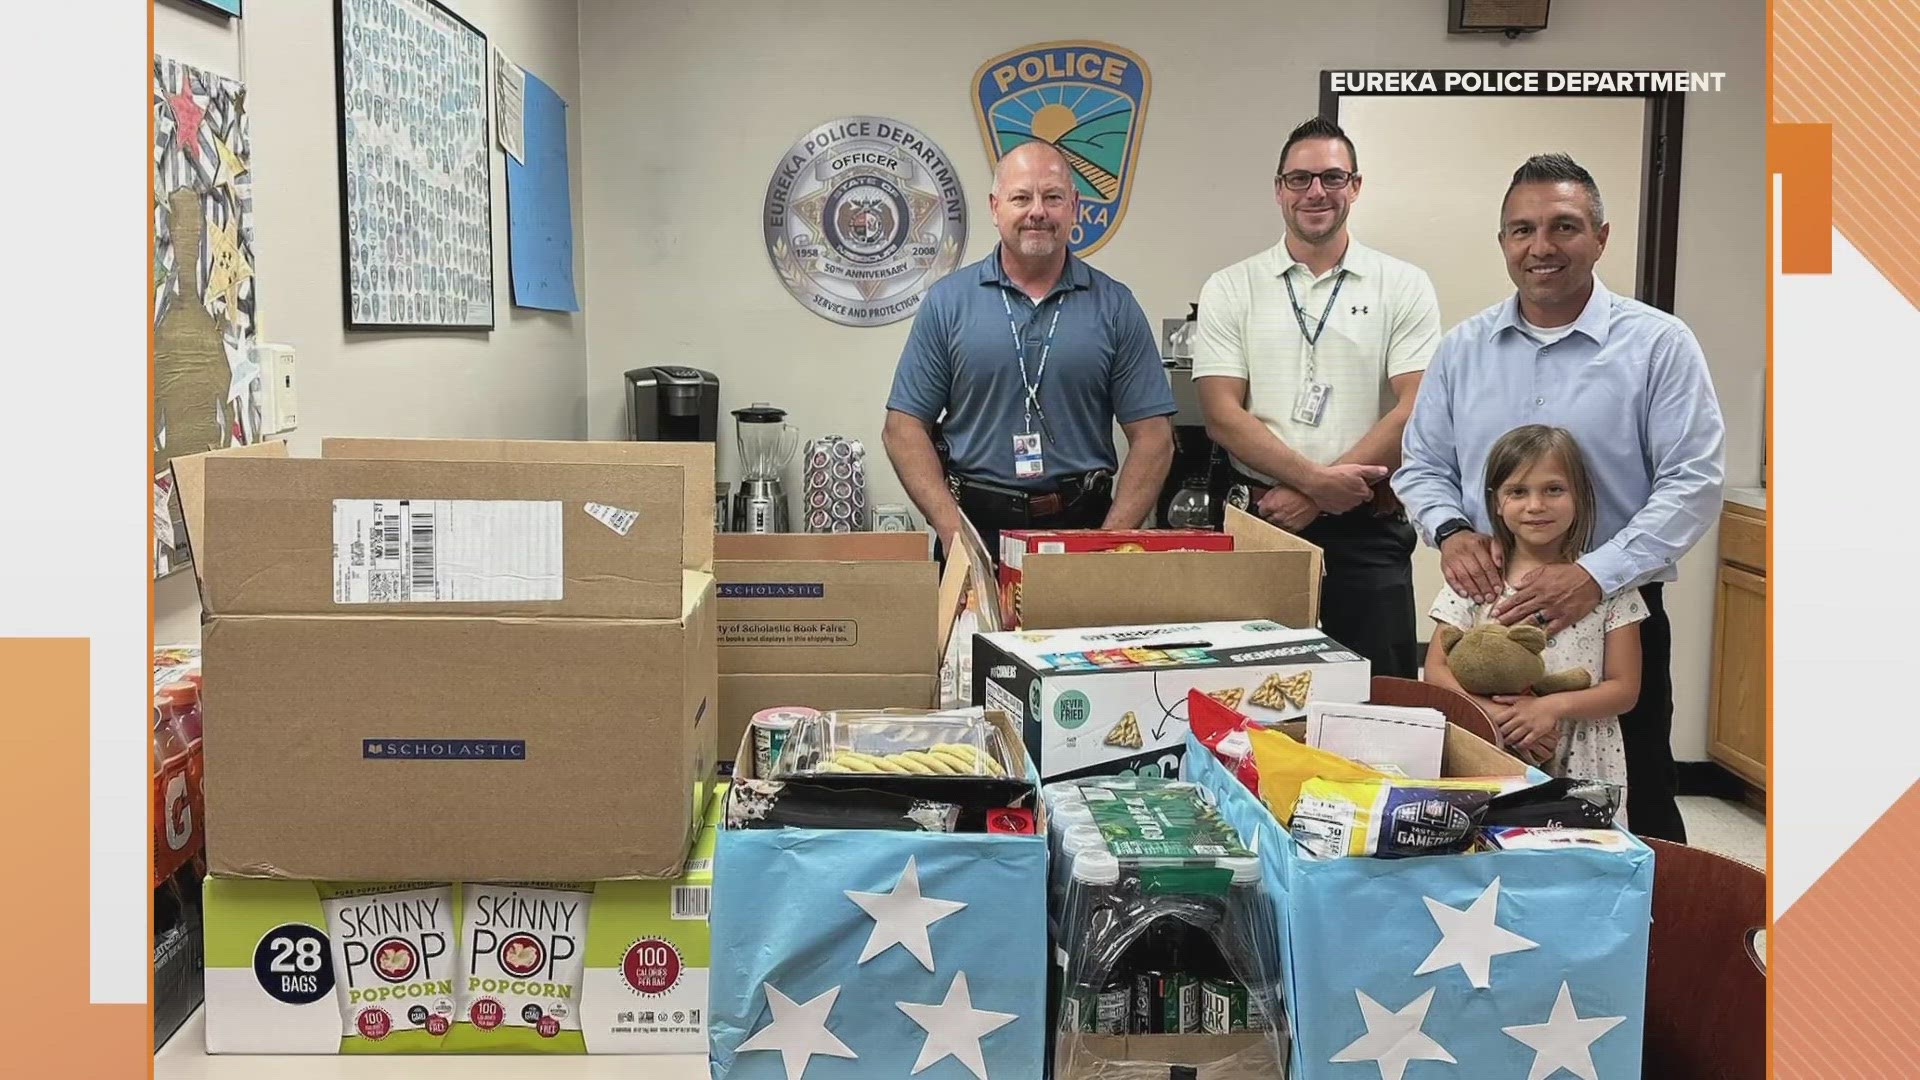 A Rockwood fourth grader dropped off snacks at the Eureka Police Department. The department took to Facebook to thank her for the sweet donation.